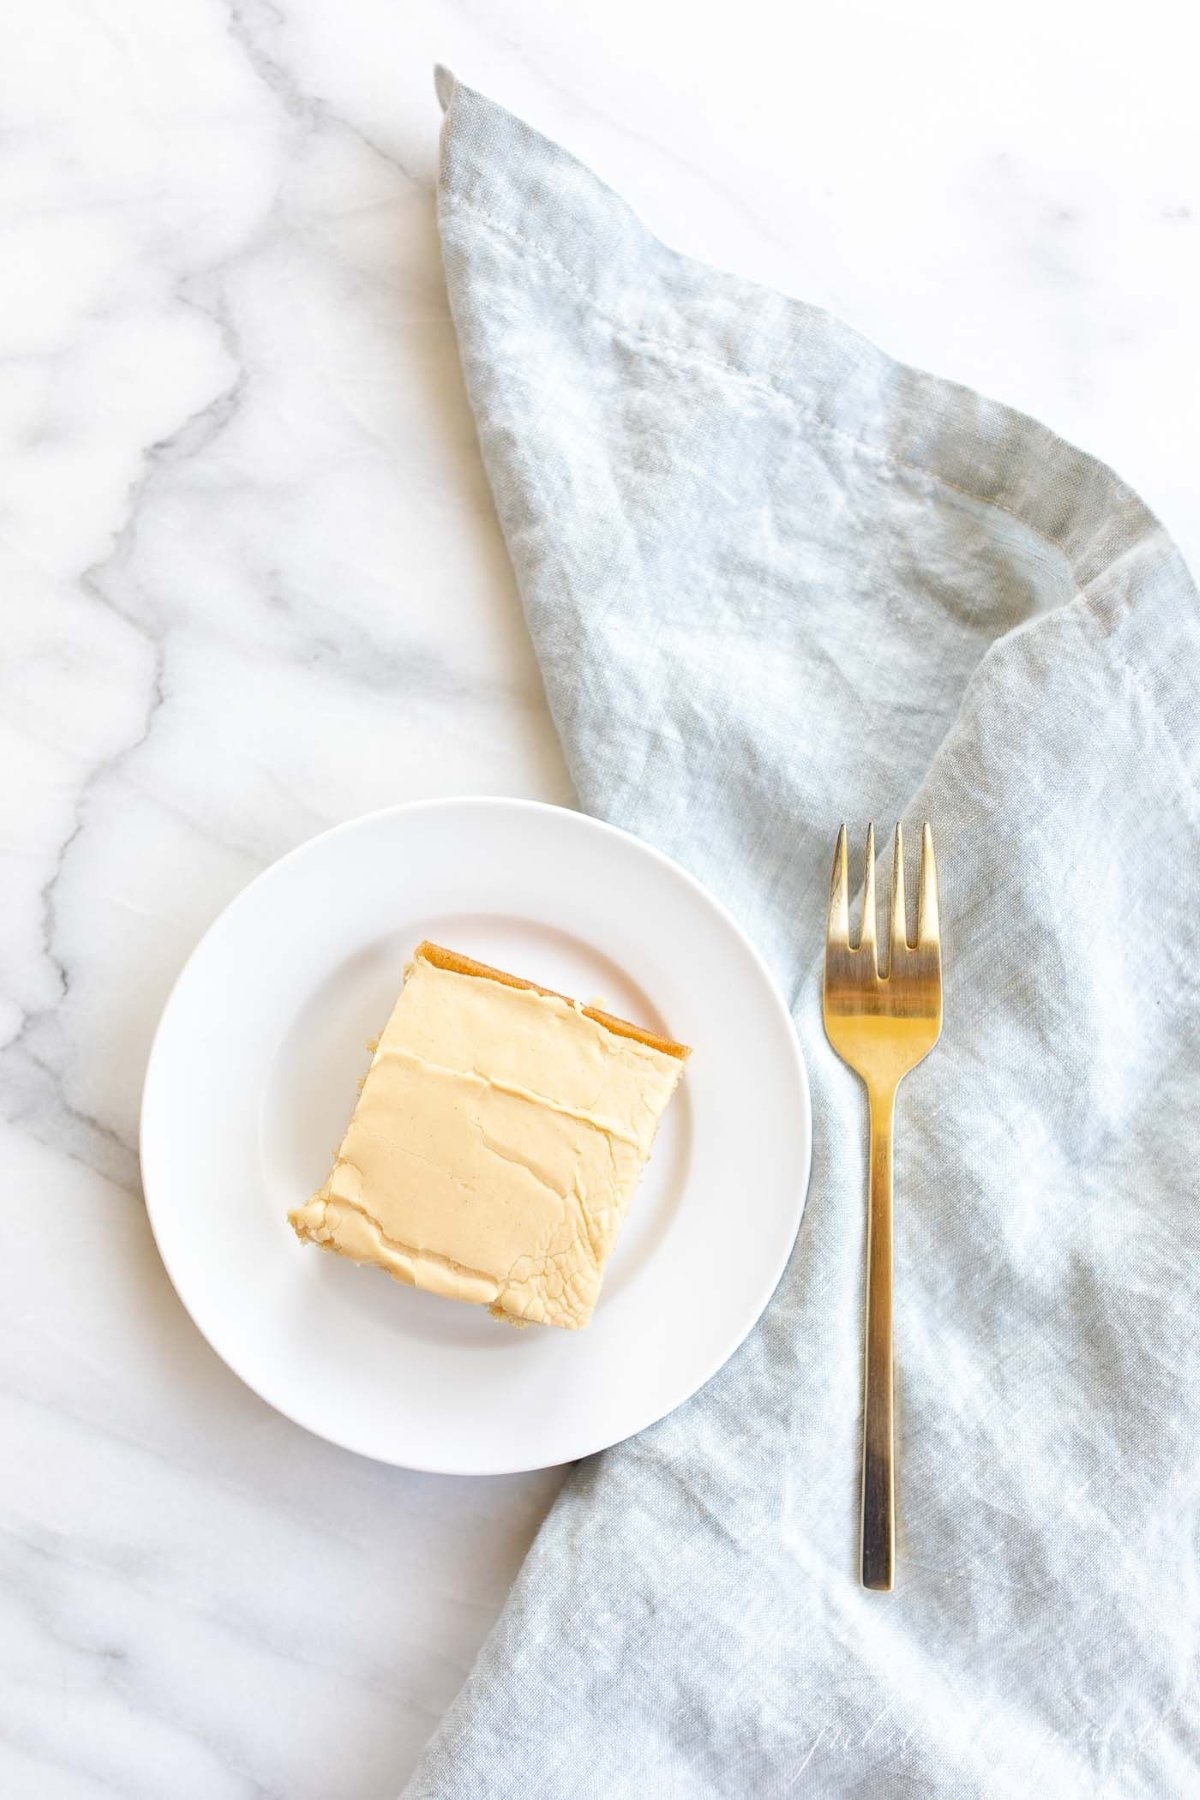 A slice of peanut butter cake on a white plate.